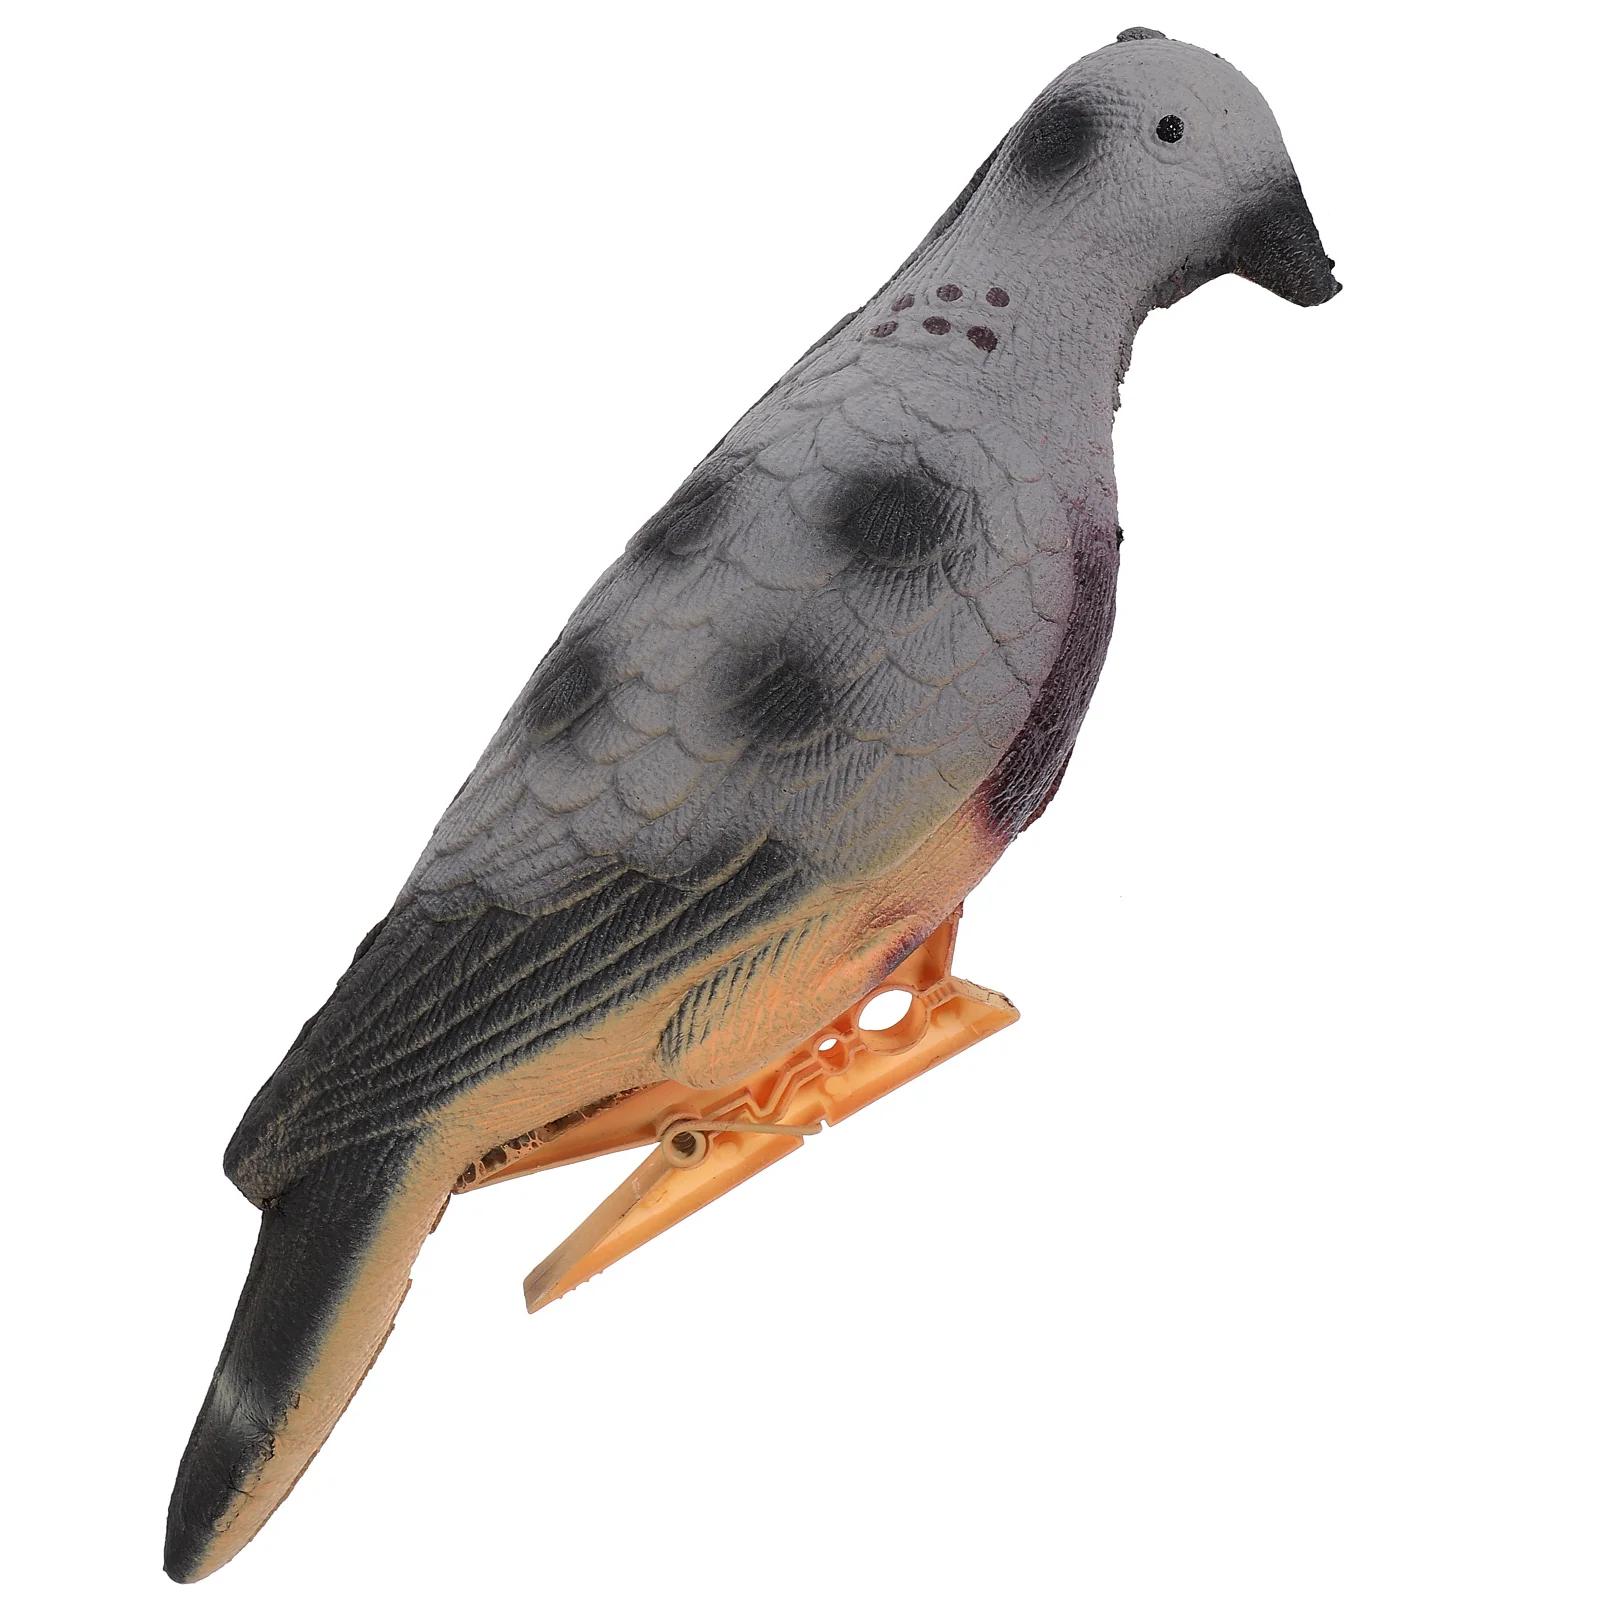 

Astetic Room Decor Simulated Pigeon Target Adorn Archery Equipment Dove Toxophily Sports Lovely Animal Realistic